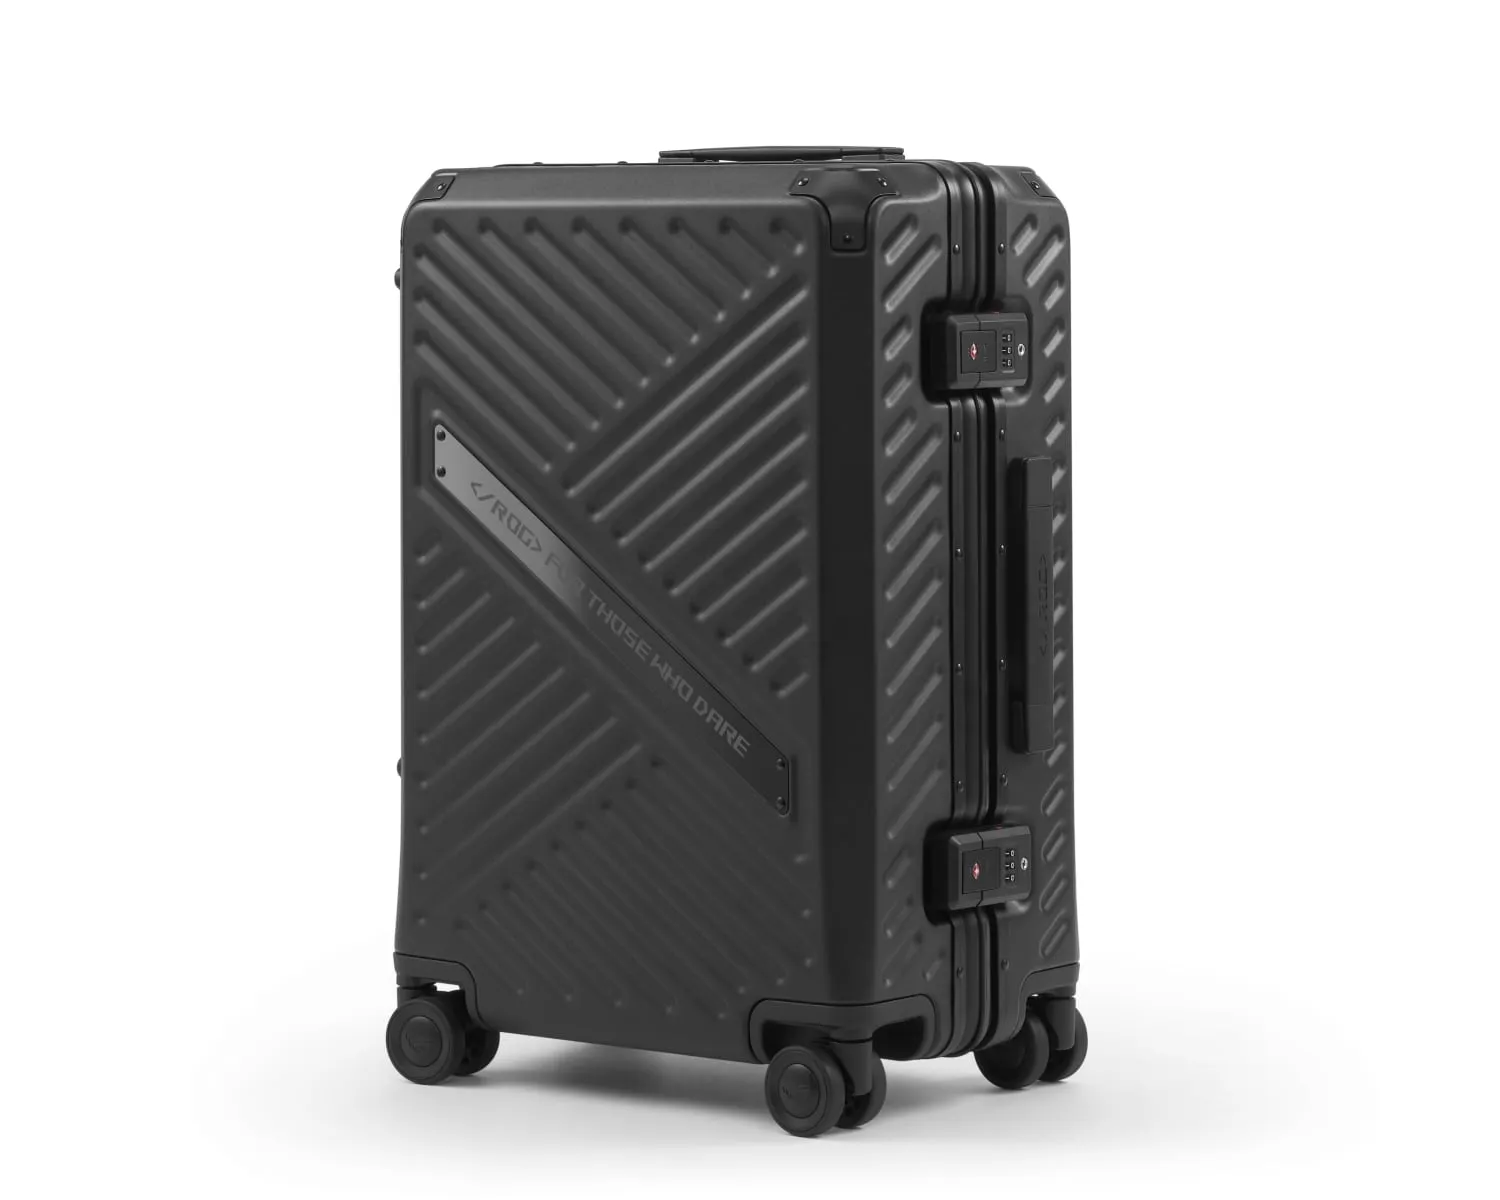 Off center front view of the ROG SLASH Hard Case Luggage on a white background